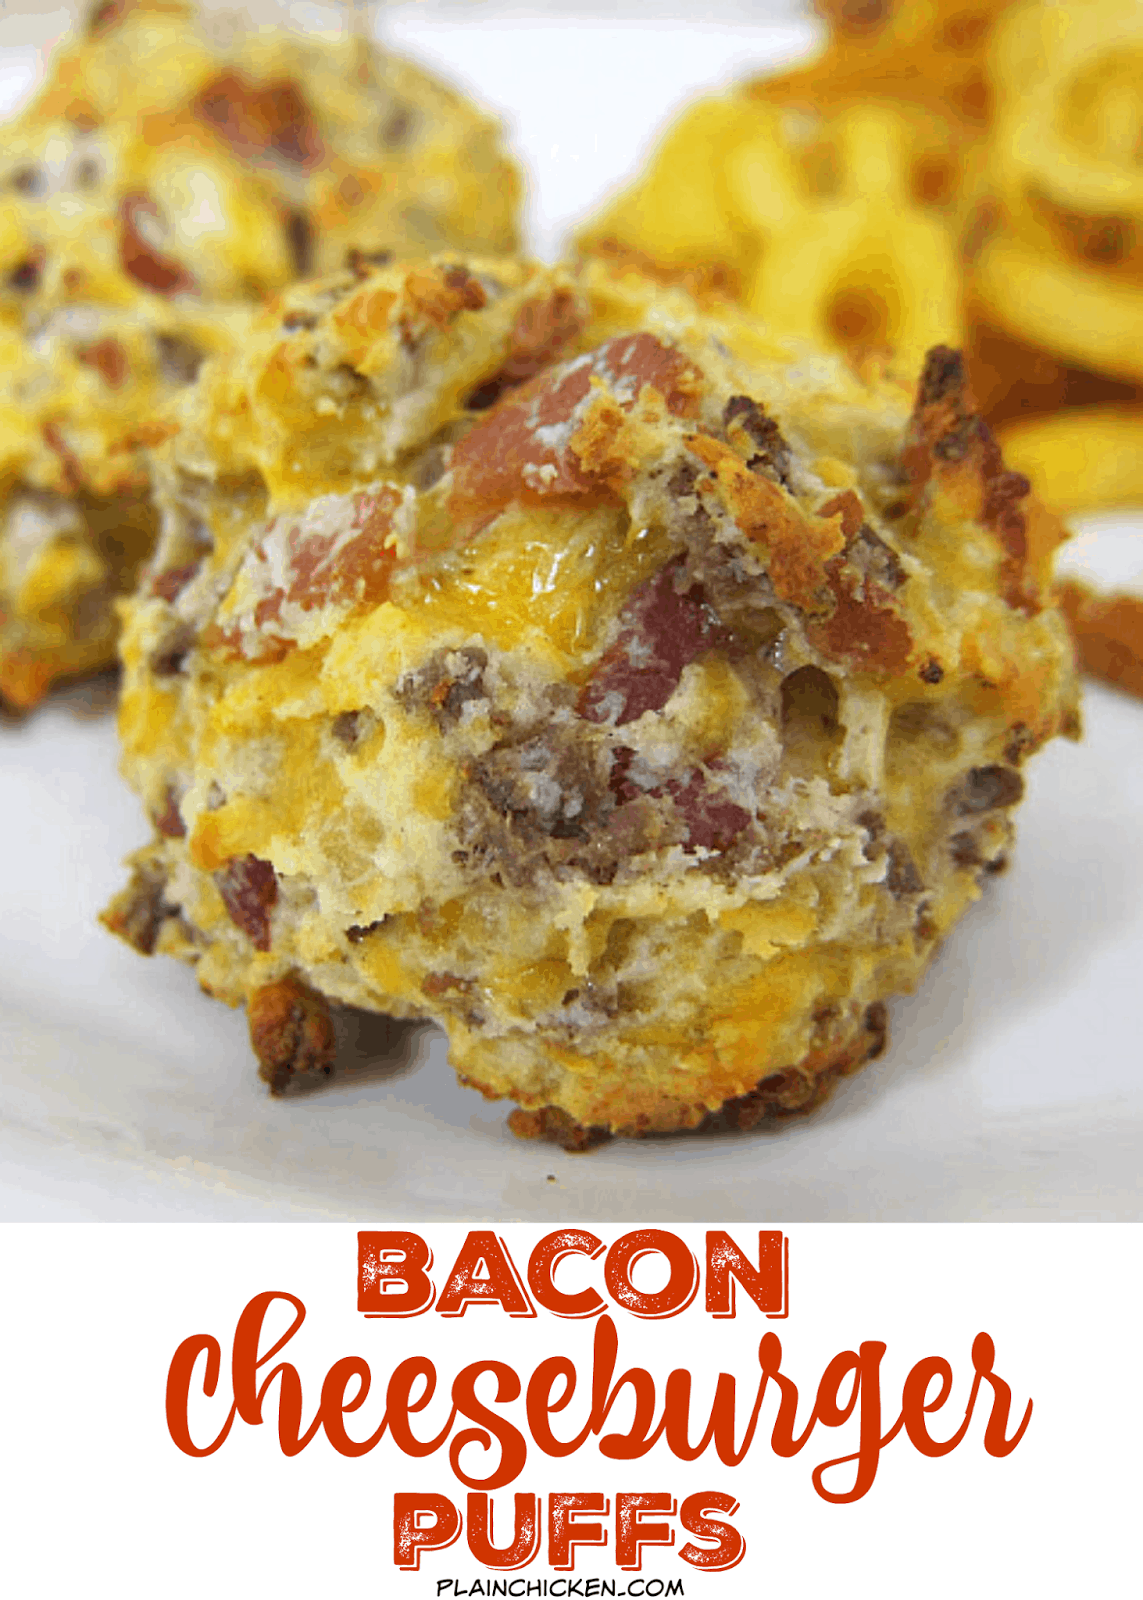 Bacon Cheeseburger Puffs - all the flavors of a bacon cheeseburger in bite-size form! Hamburger, bacon, cheese, bisquick - can bake and freezer for a quick snack later. These don't last long at parties!